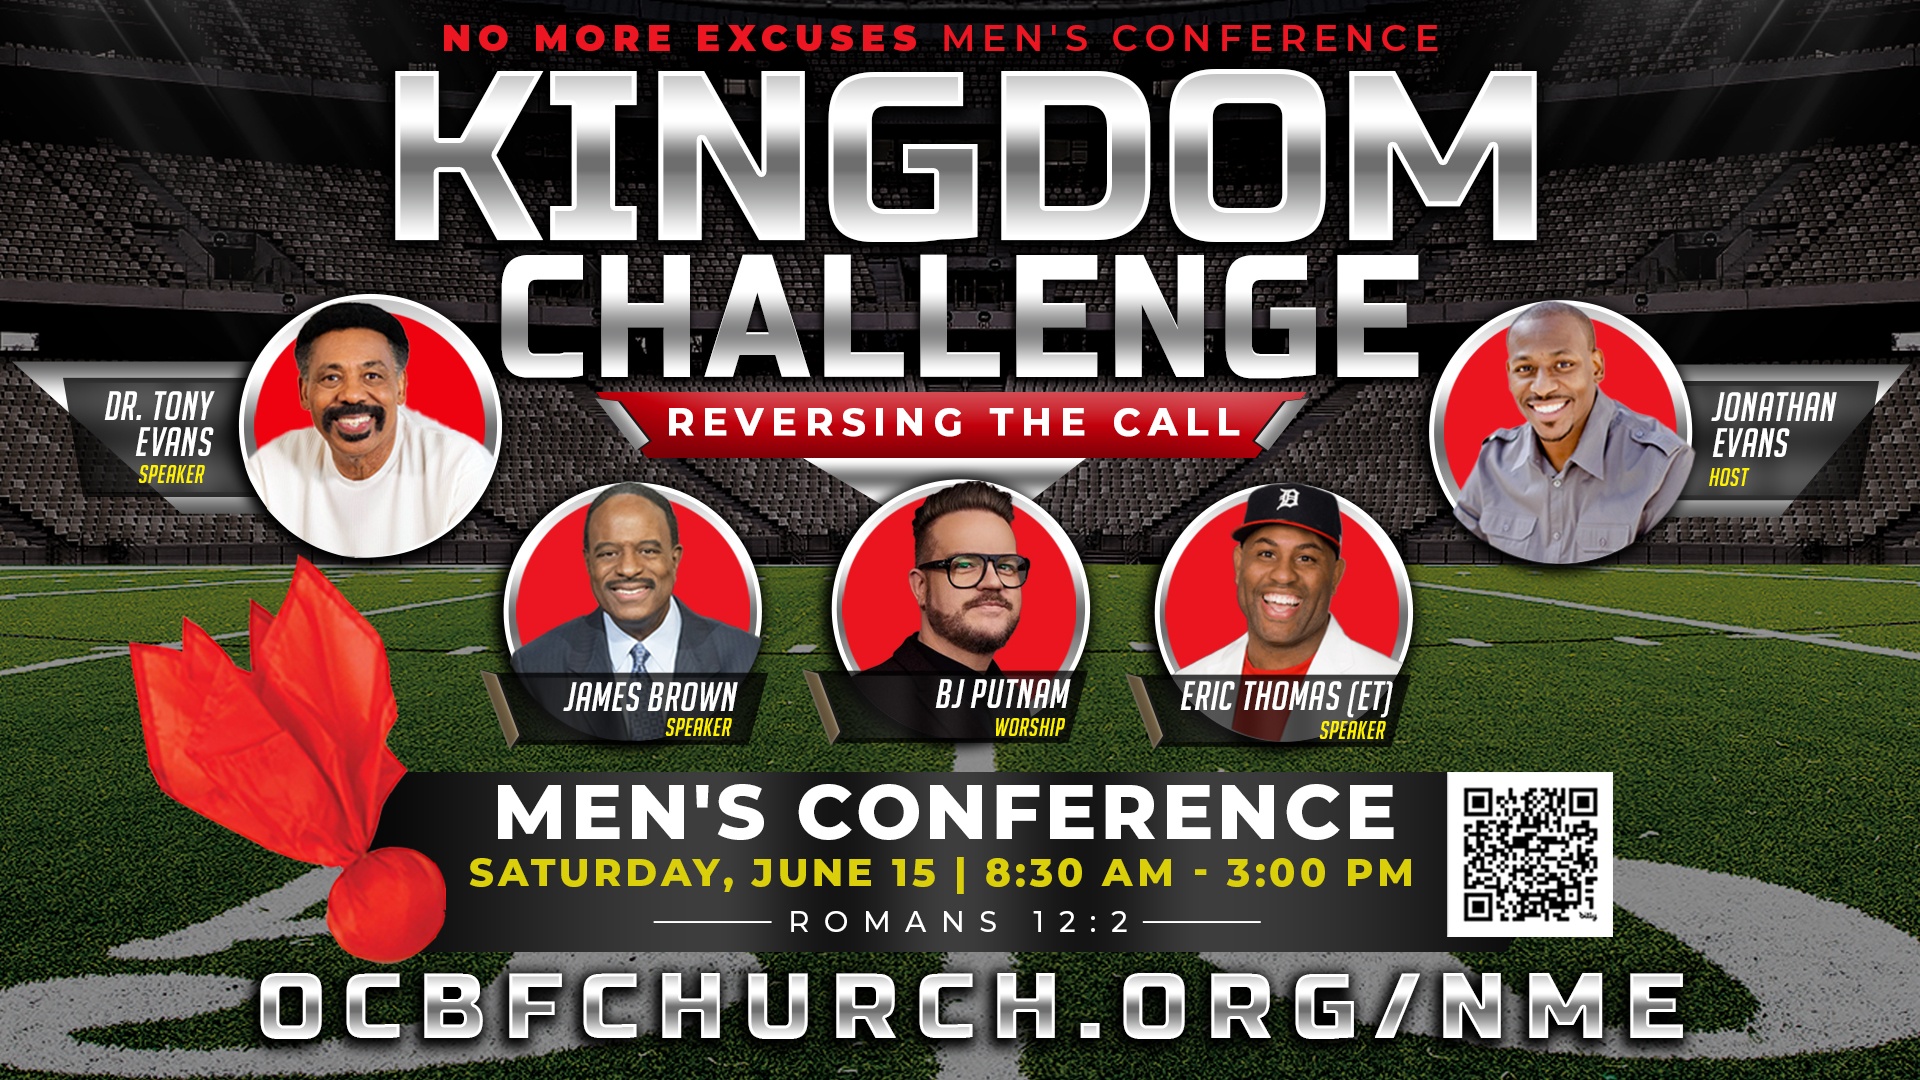 No More Excuses Men's Conference Kingdom Challenge Reversing the Call with Tony Evans, Jonathan Evans, James Brown, Eric Thomas, BJ Putman